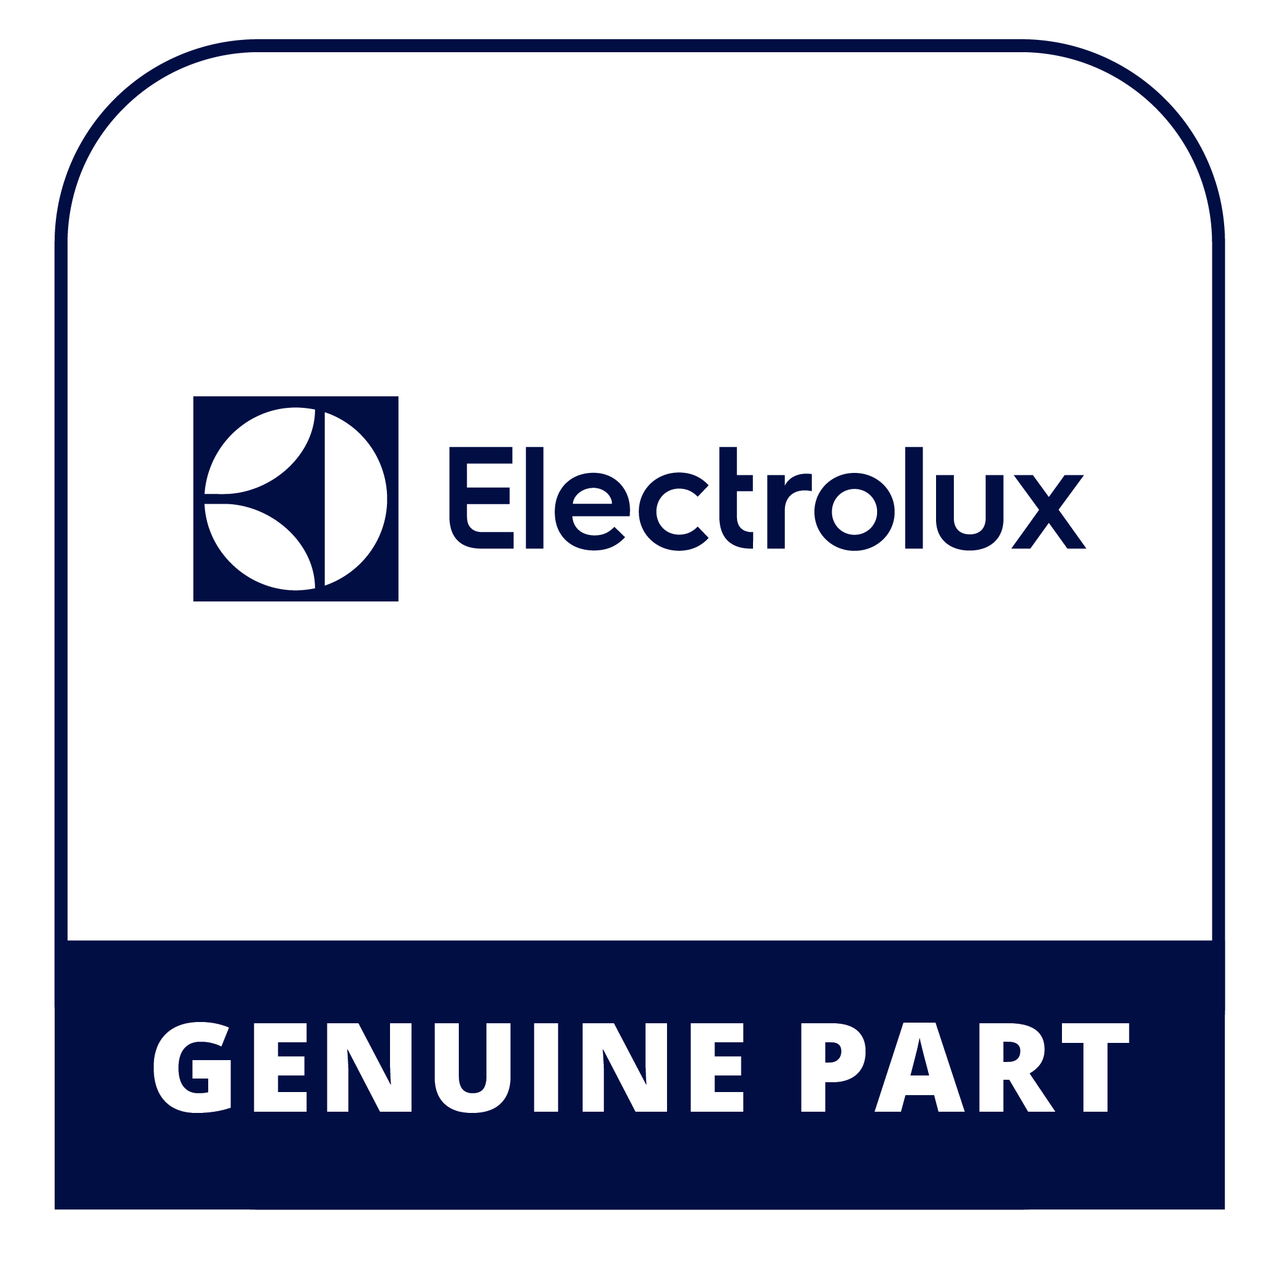 Frigidaire - Electrolux 154640101 Owners Manual - Genuine Electrolux Part